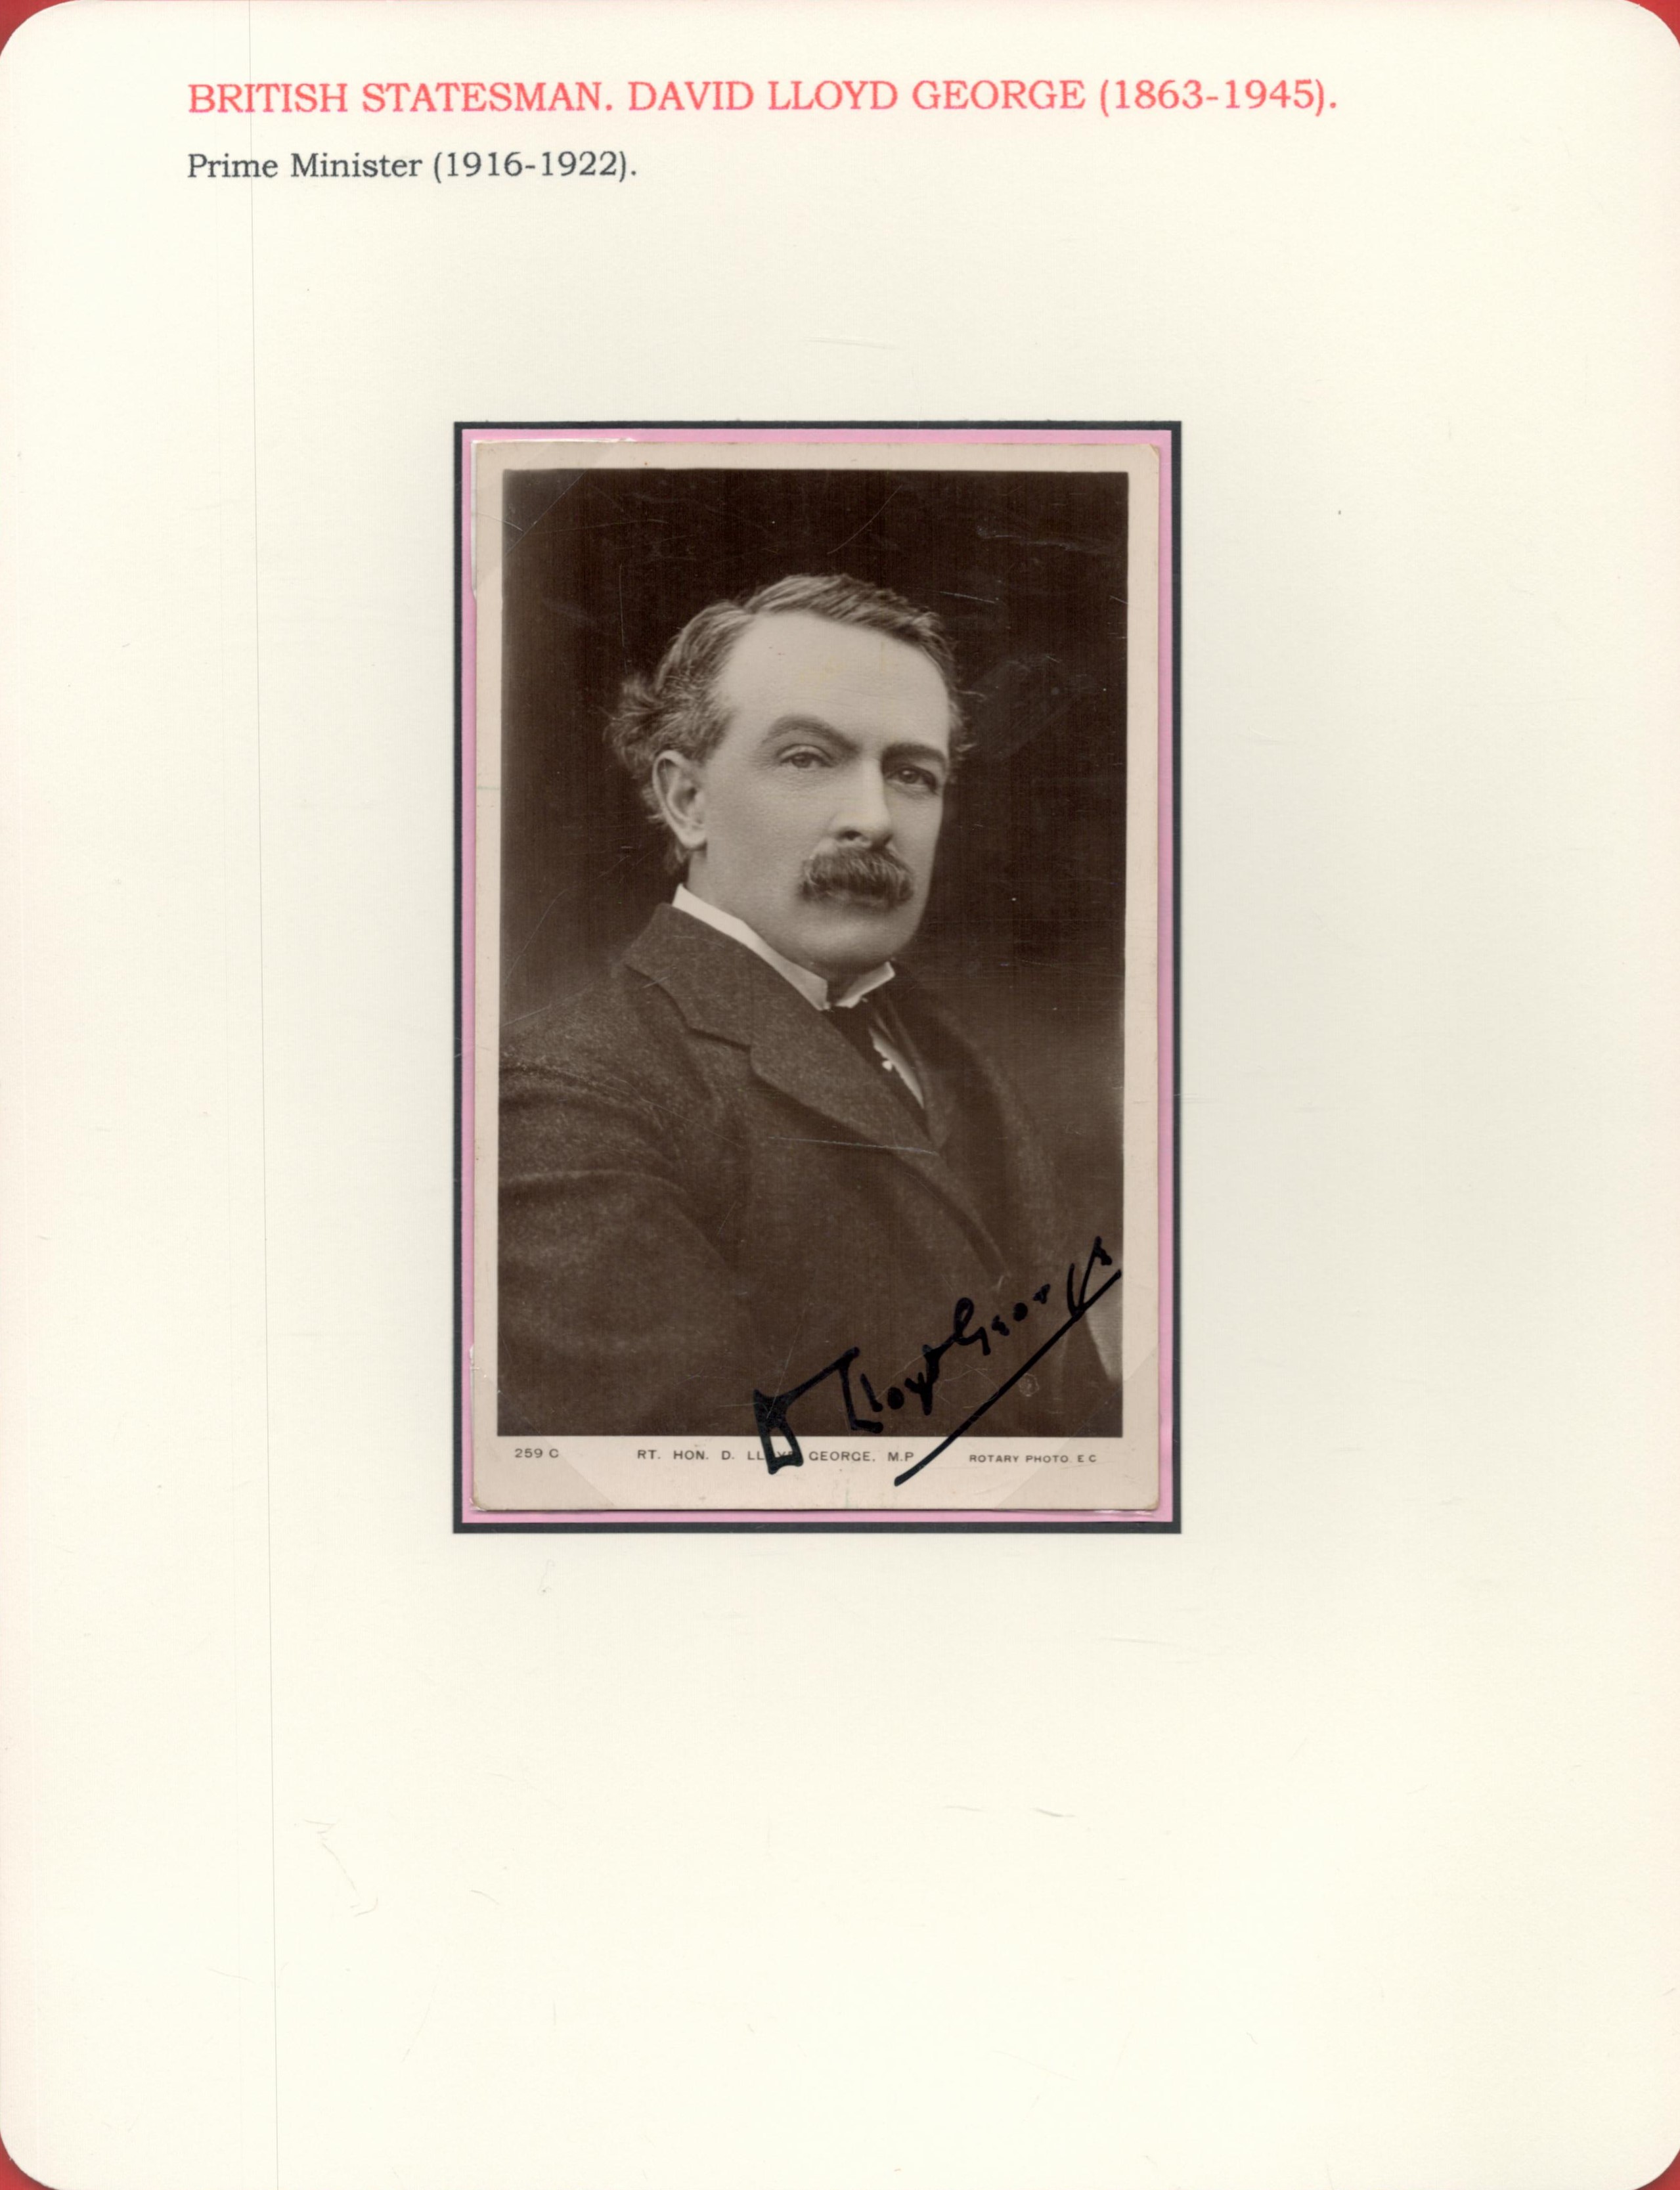 Former PM David Lloyd George Signed 5 x 3 inch approx Vintage Black and White Photo. Prime